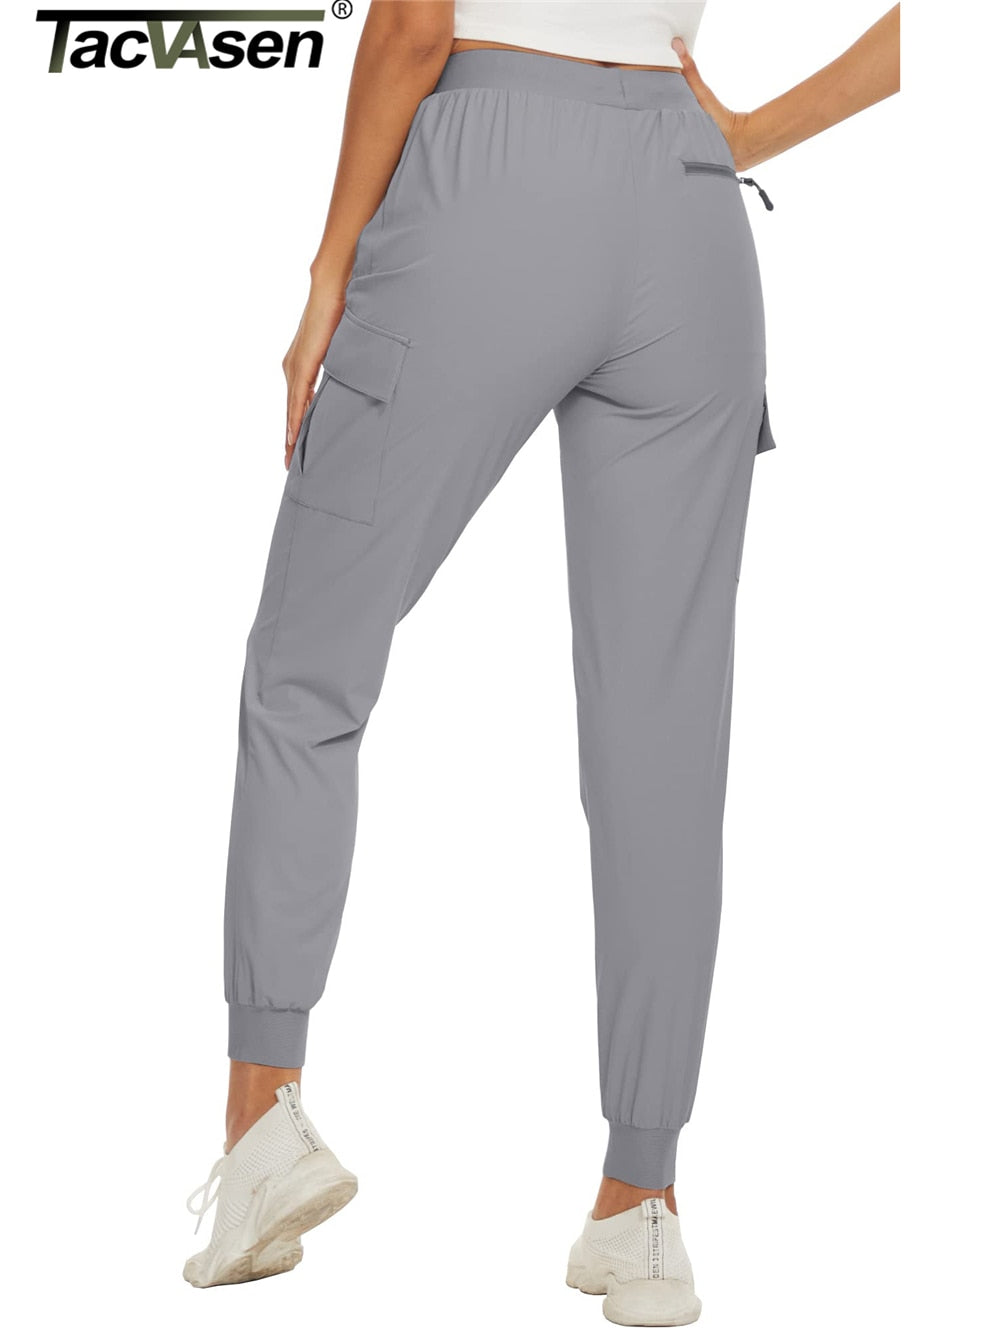 Summer Quick Dry Pants Women's Jogger Sweatpants Lightweight Breathable 6 Pockets Elastic Waist Casual Long Trousers The Clothing Company Sydney